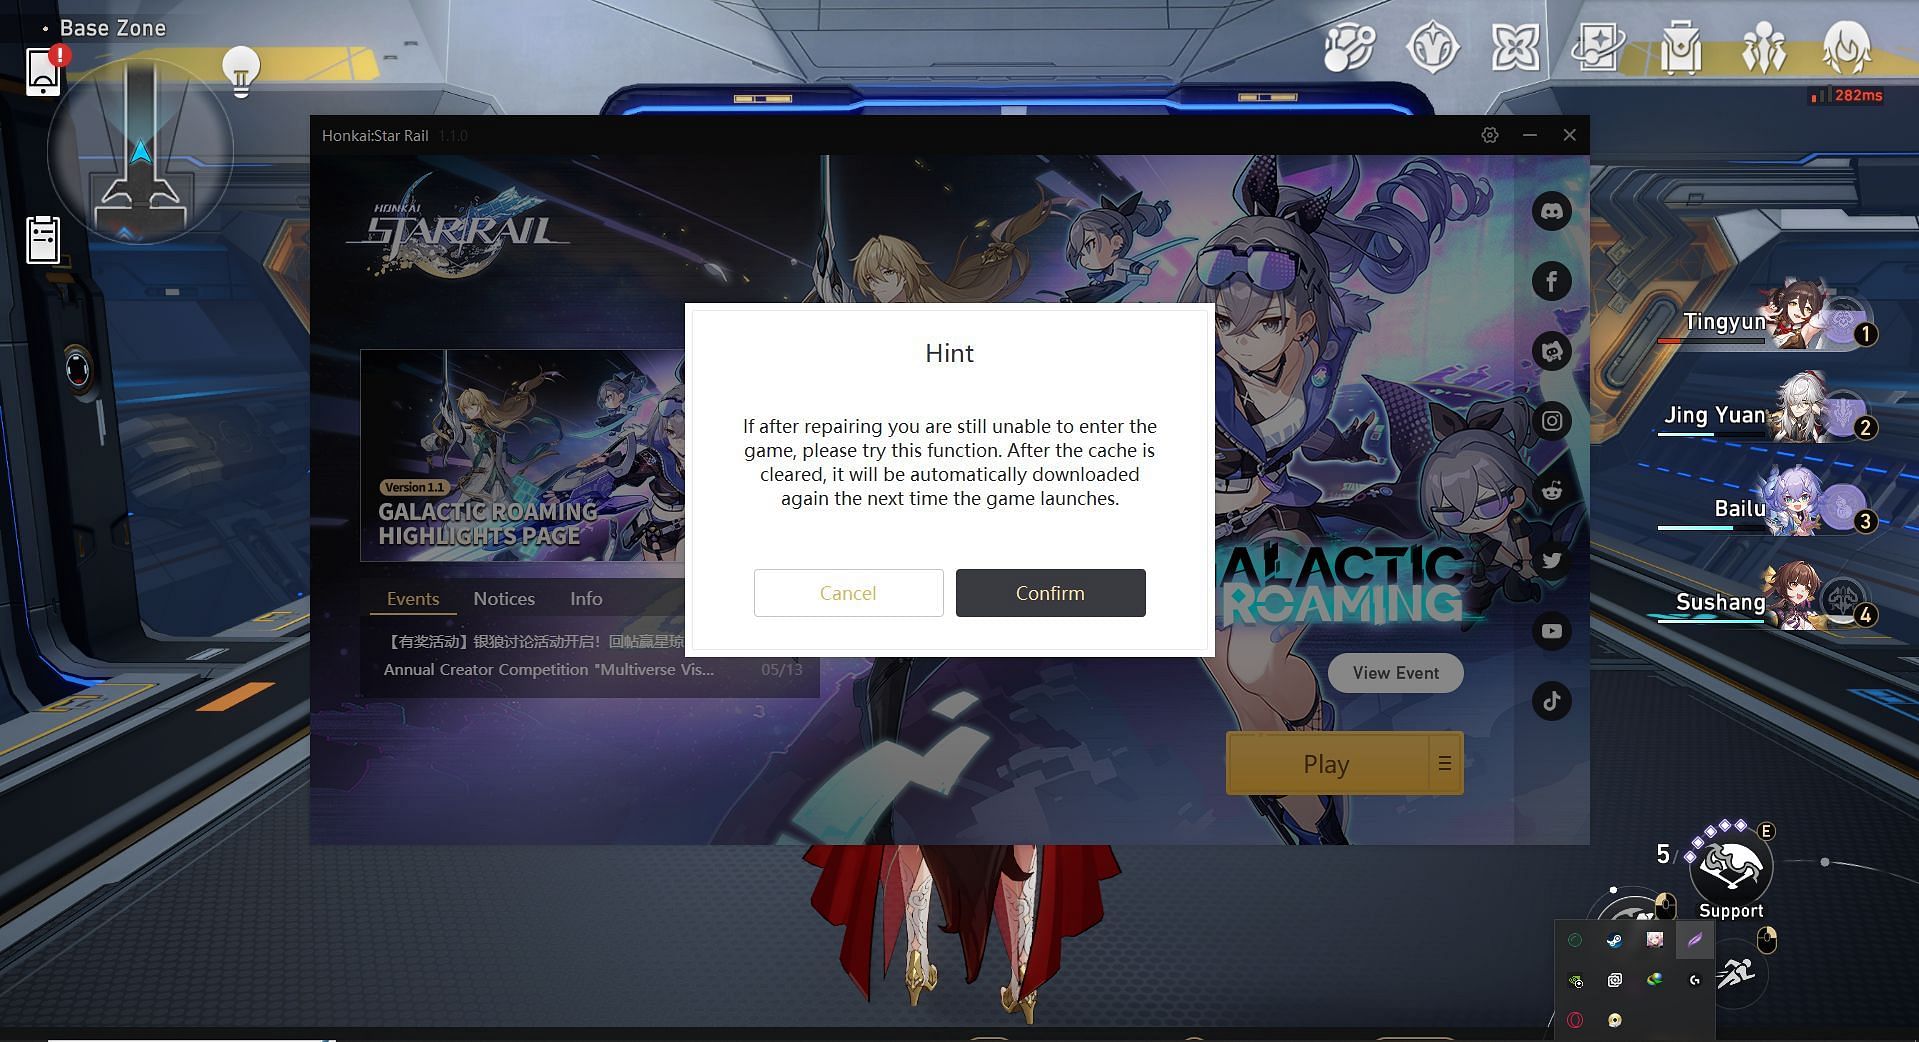 Clearing cache on the PC client (Image via Honkai Star Rail)